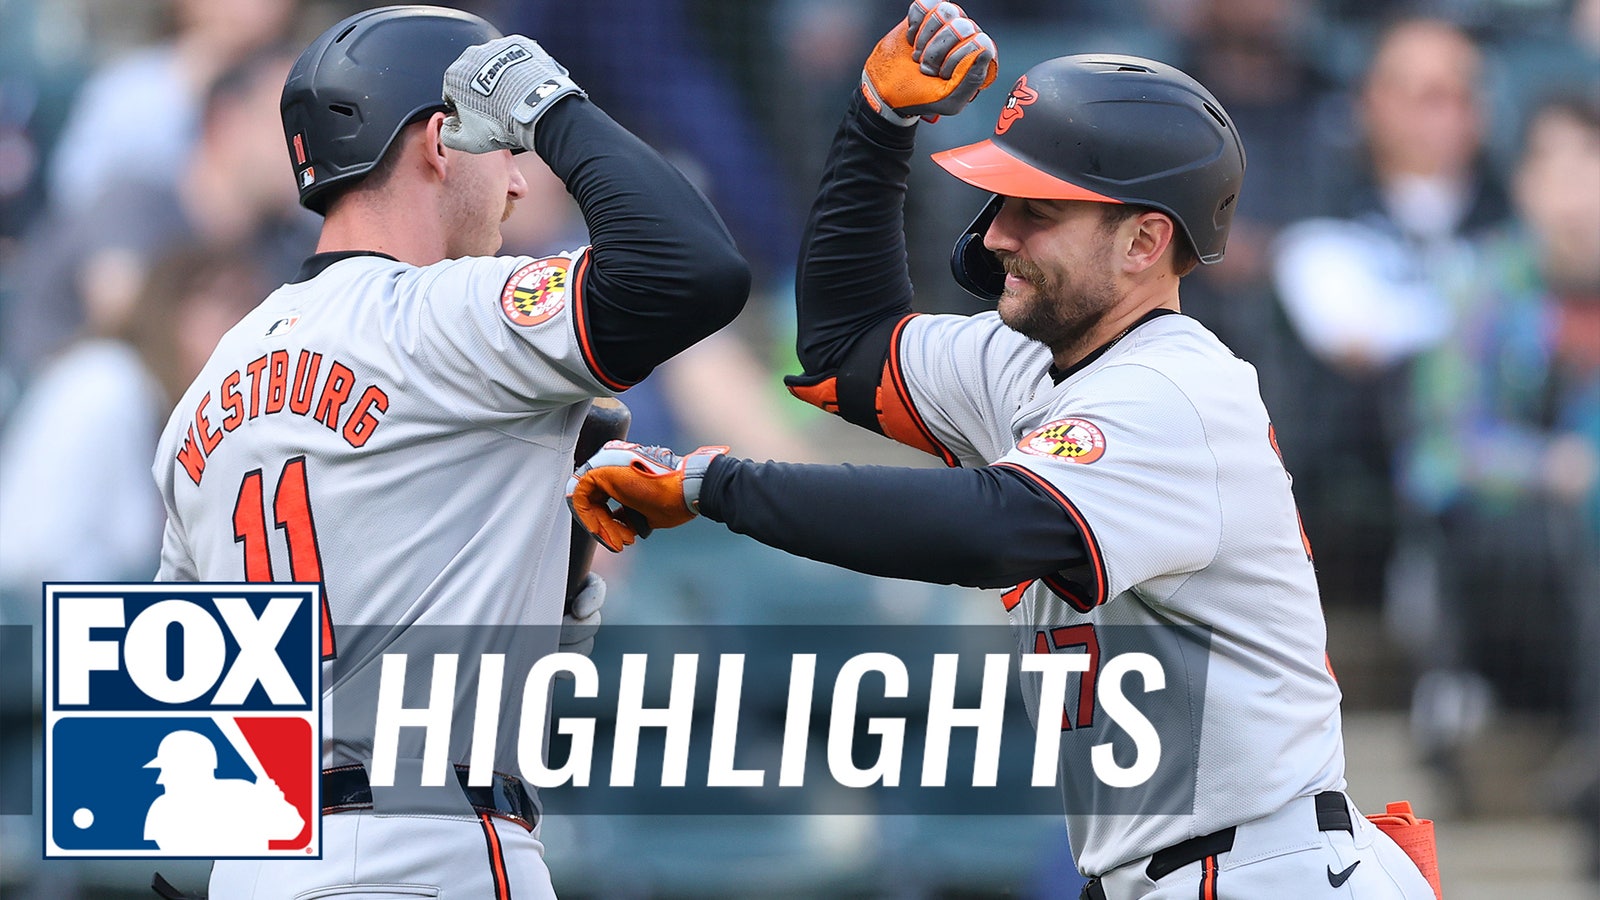 Highlights from the Orioles' 4-1 win vs. White Sox